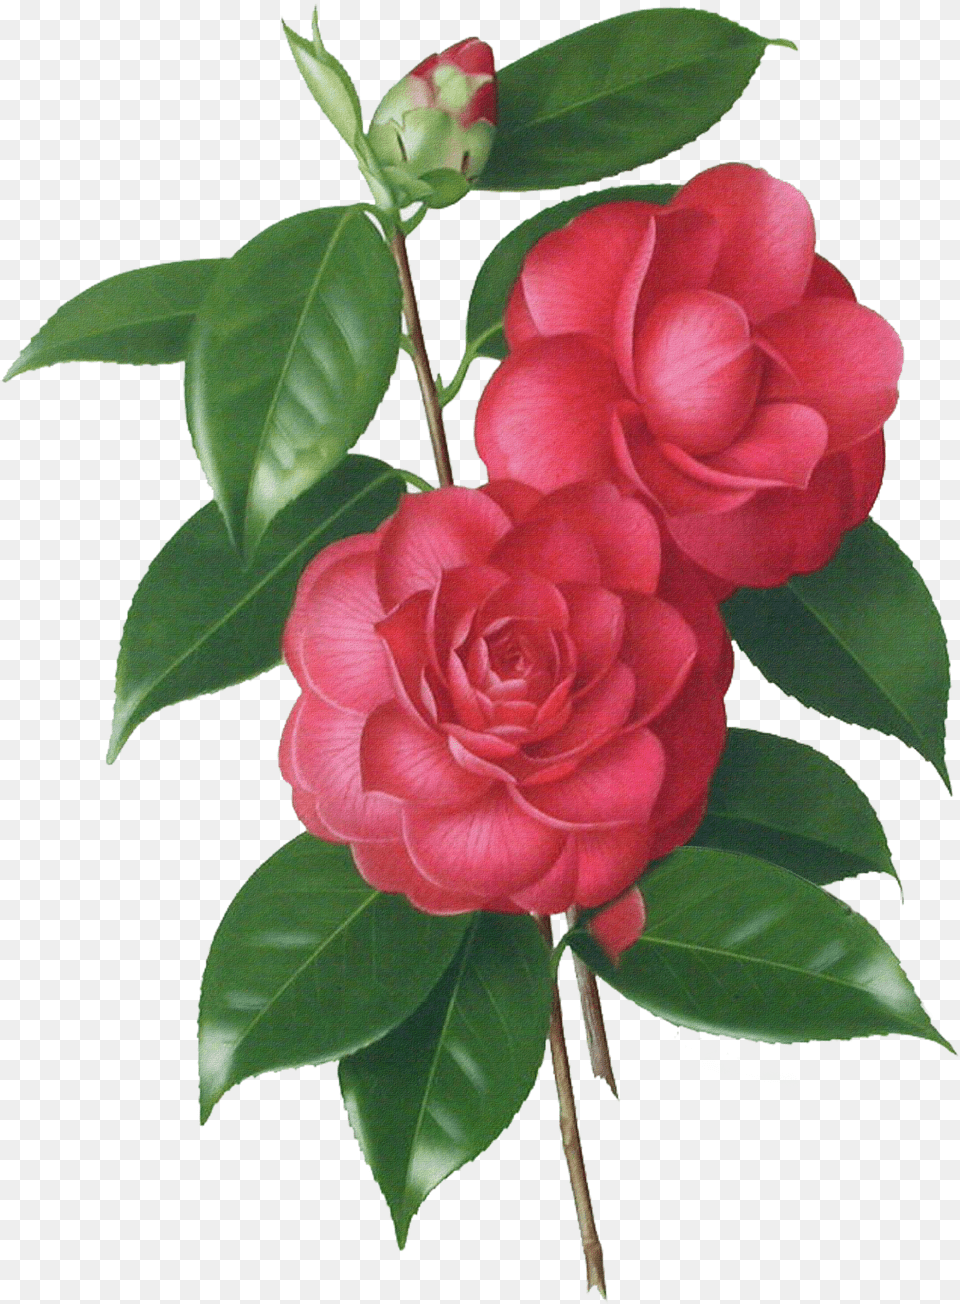 Graphic Stock Camellia Drawing Botanical Illustration Camellia Flower Drawing Png Image